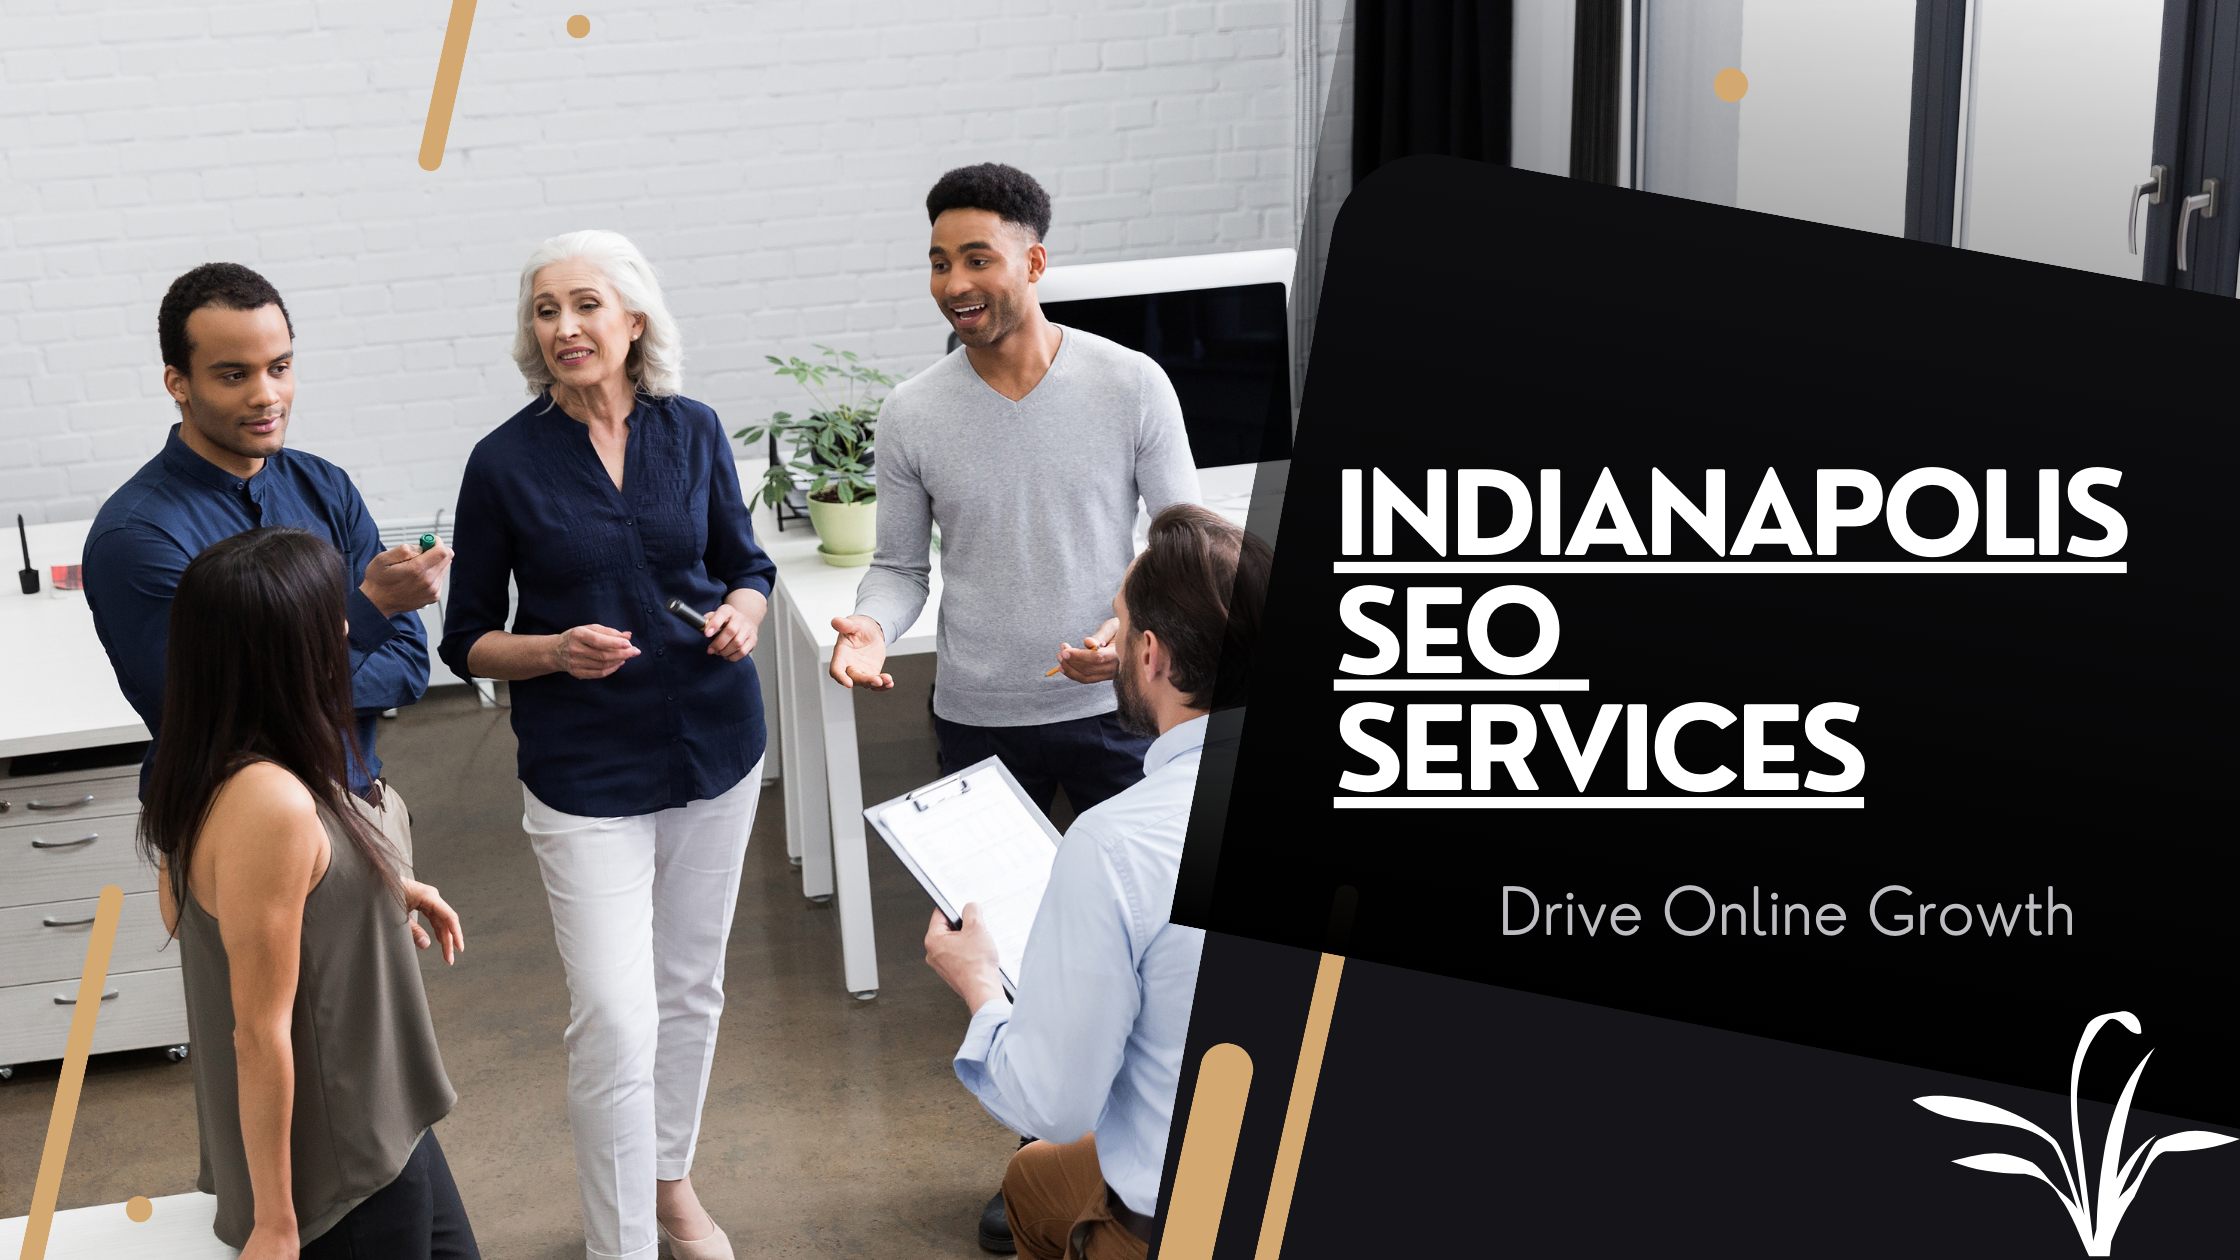 7 Growth Secretes of Indianapolis SEO Services